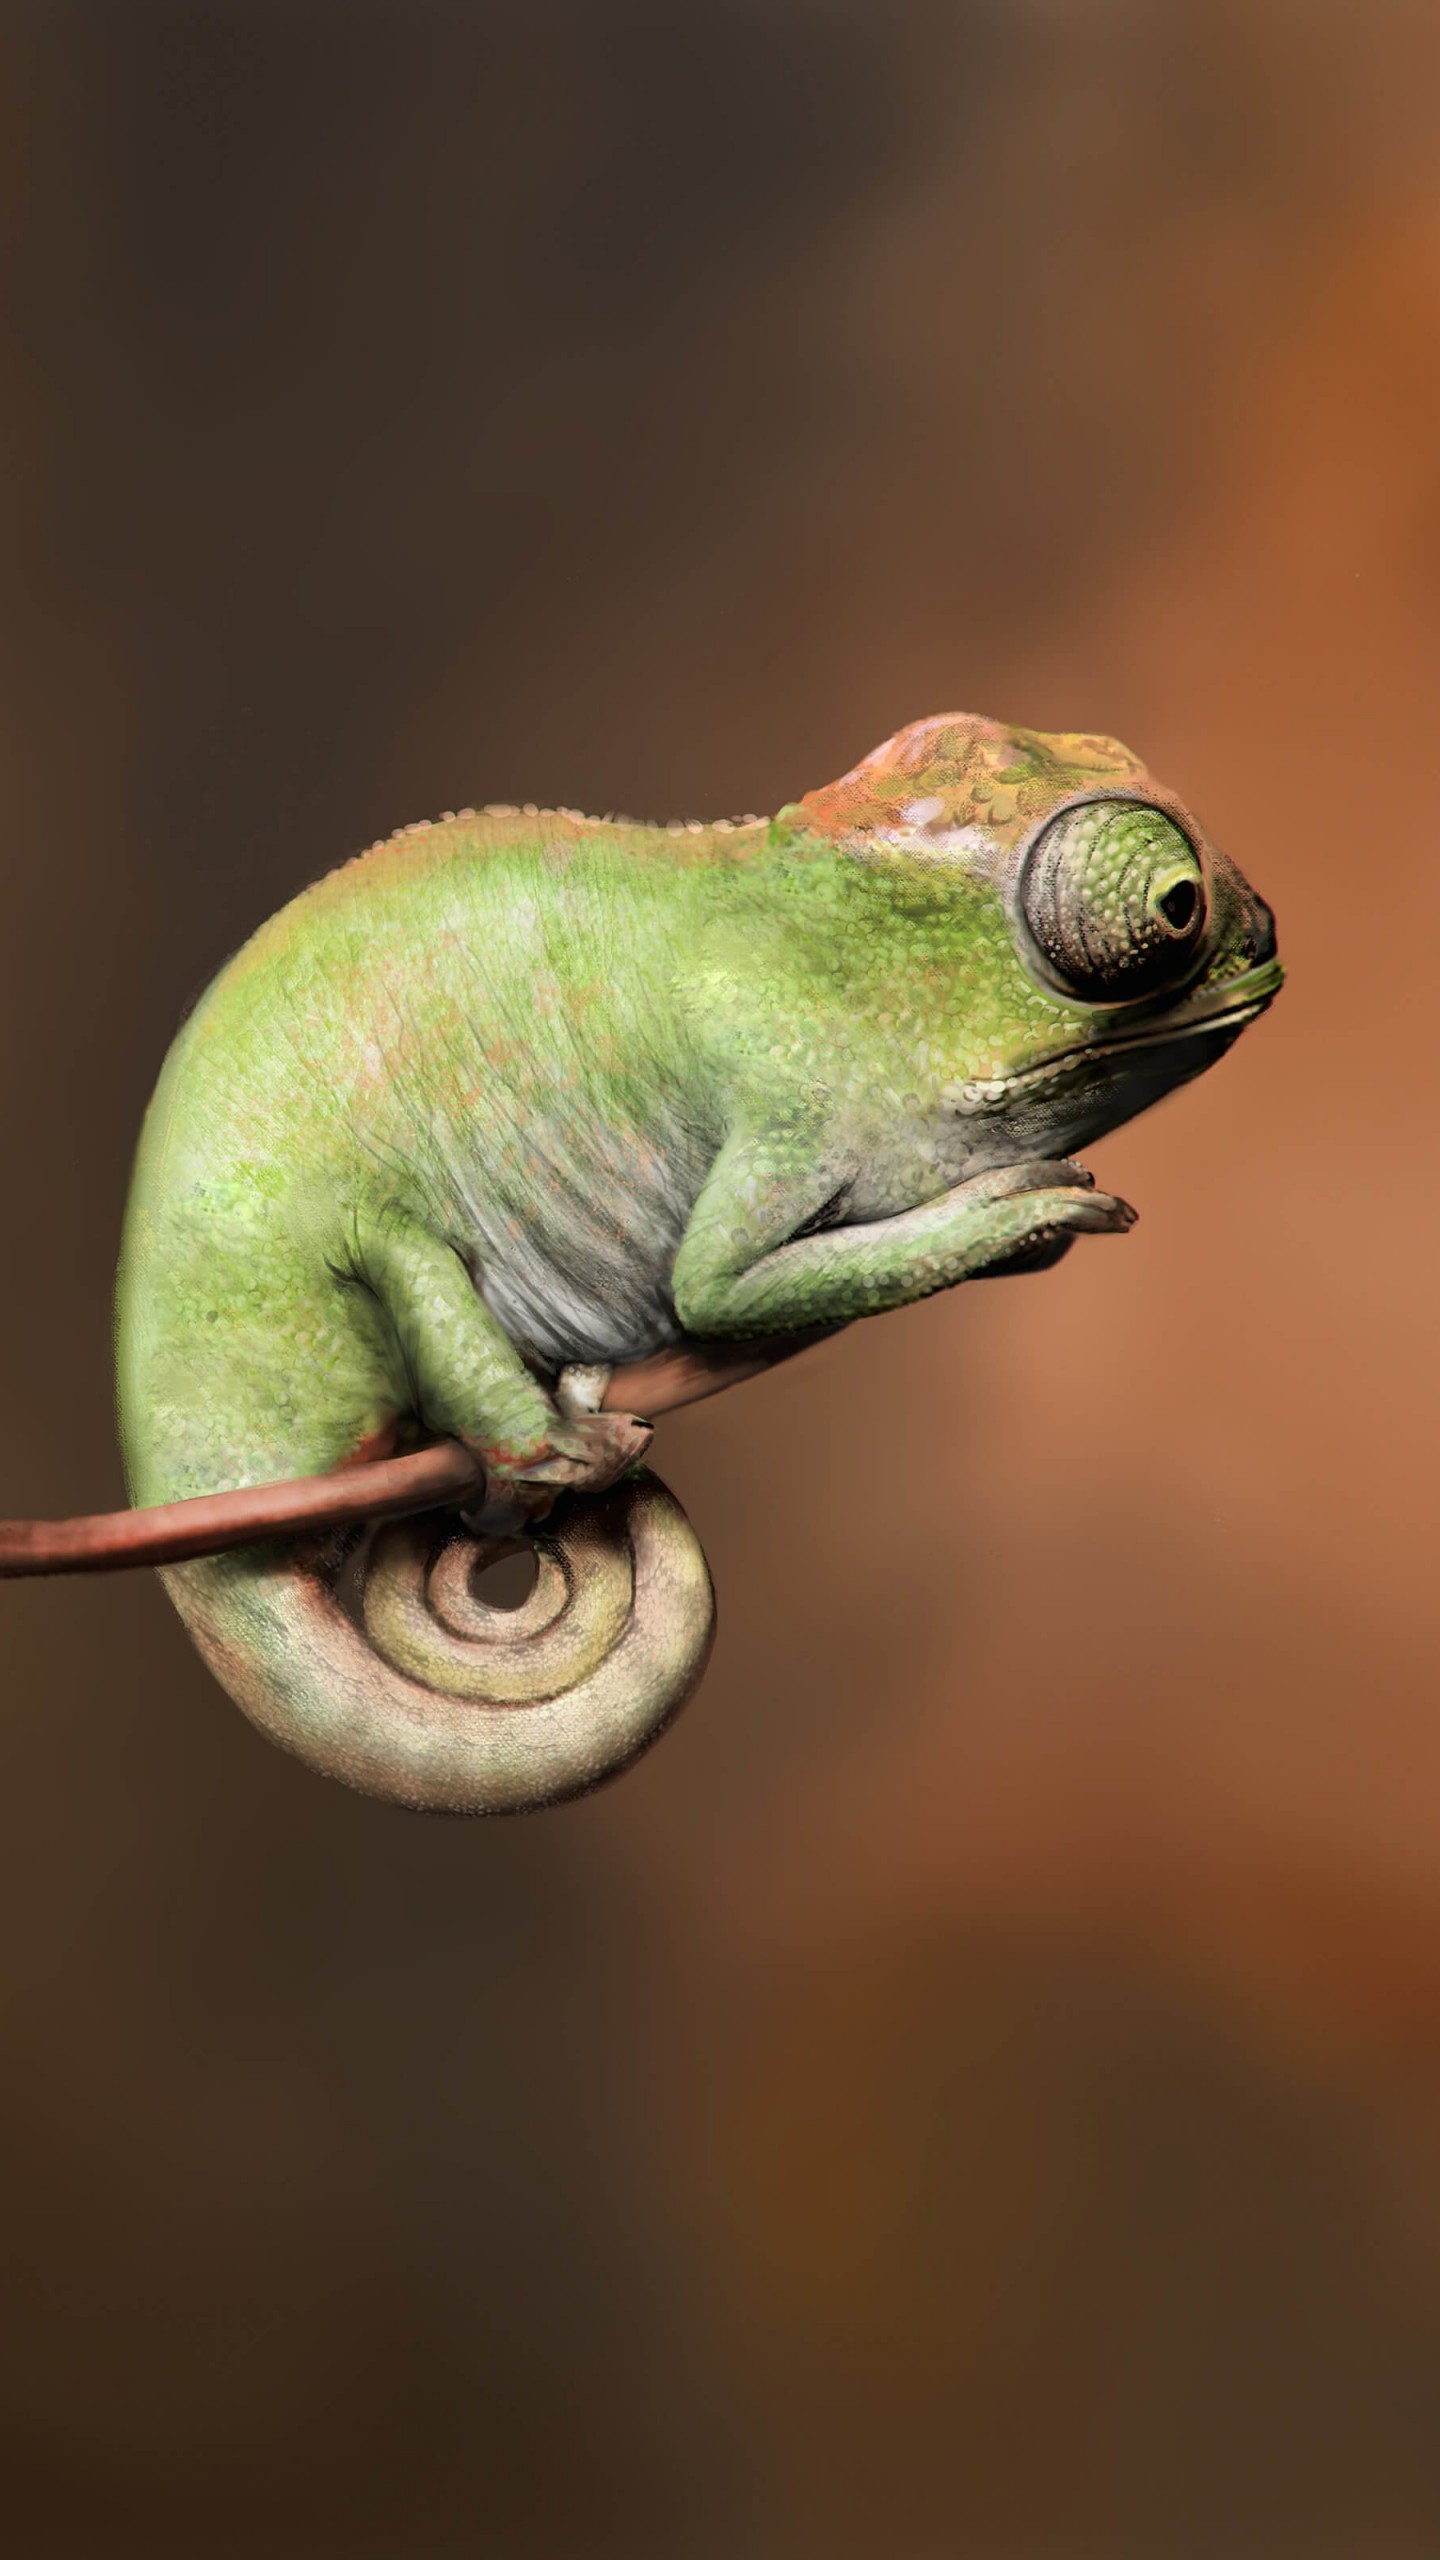 Baby Chameleon Perching On a Twisted Branch Wallpaper for Google Nexus 6P